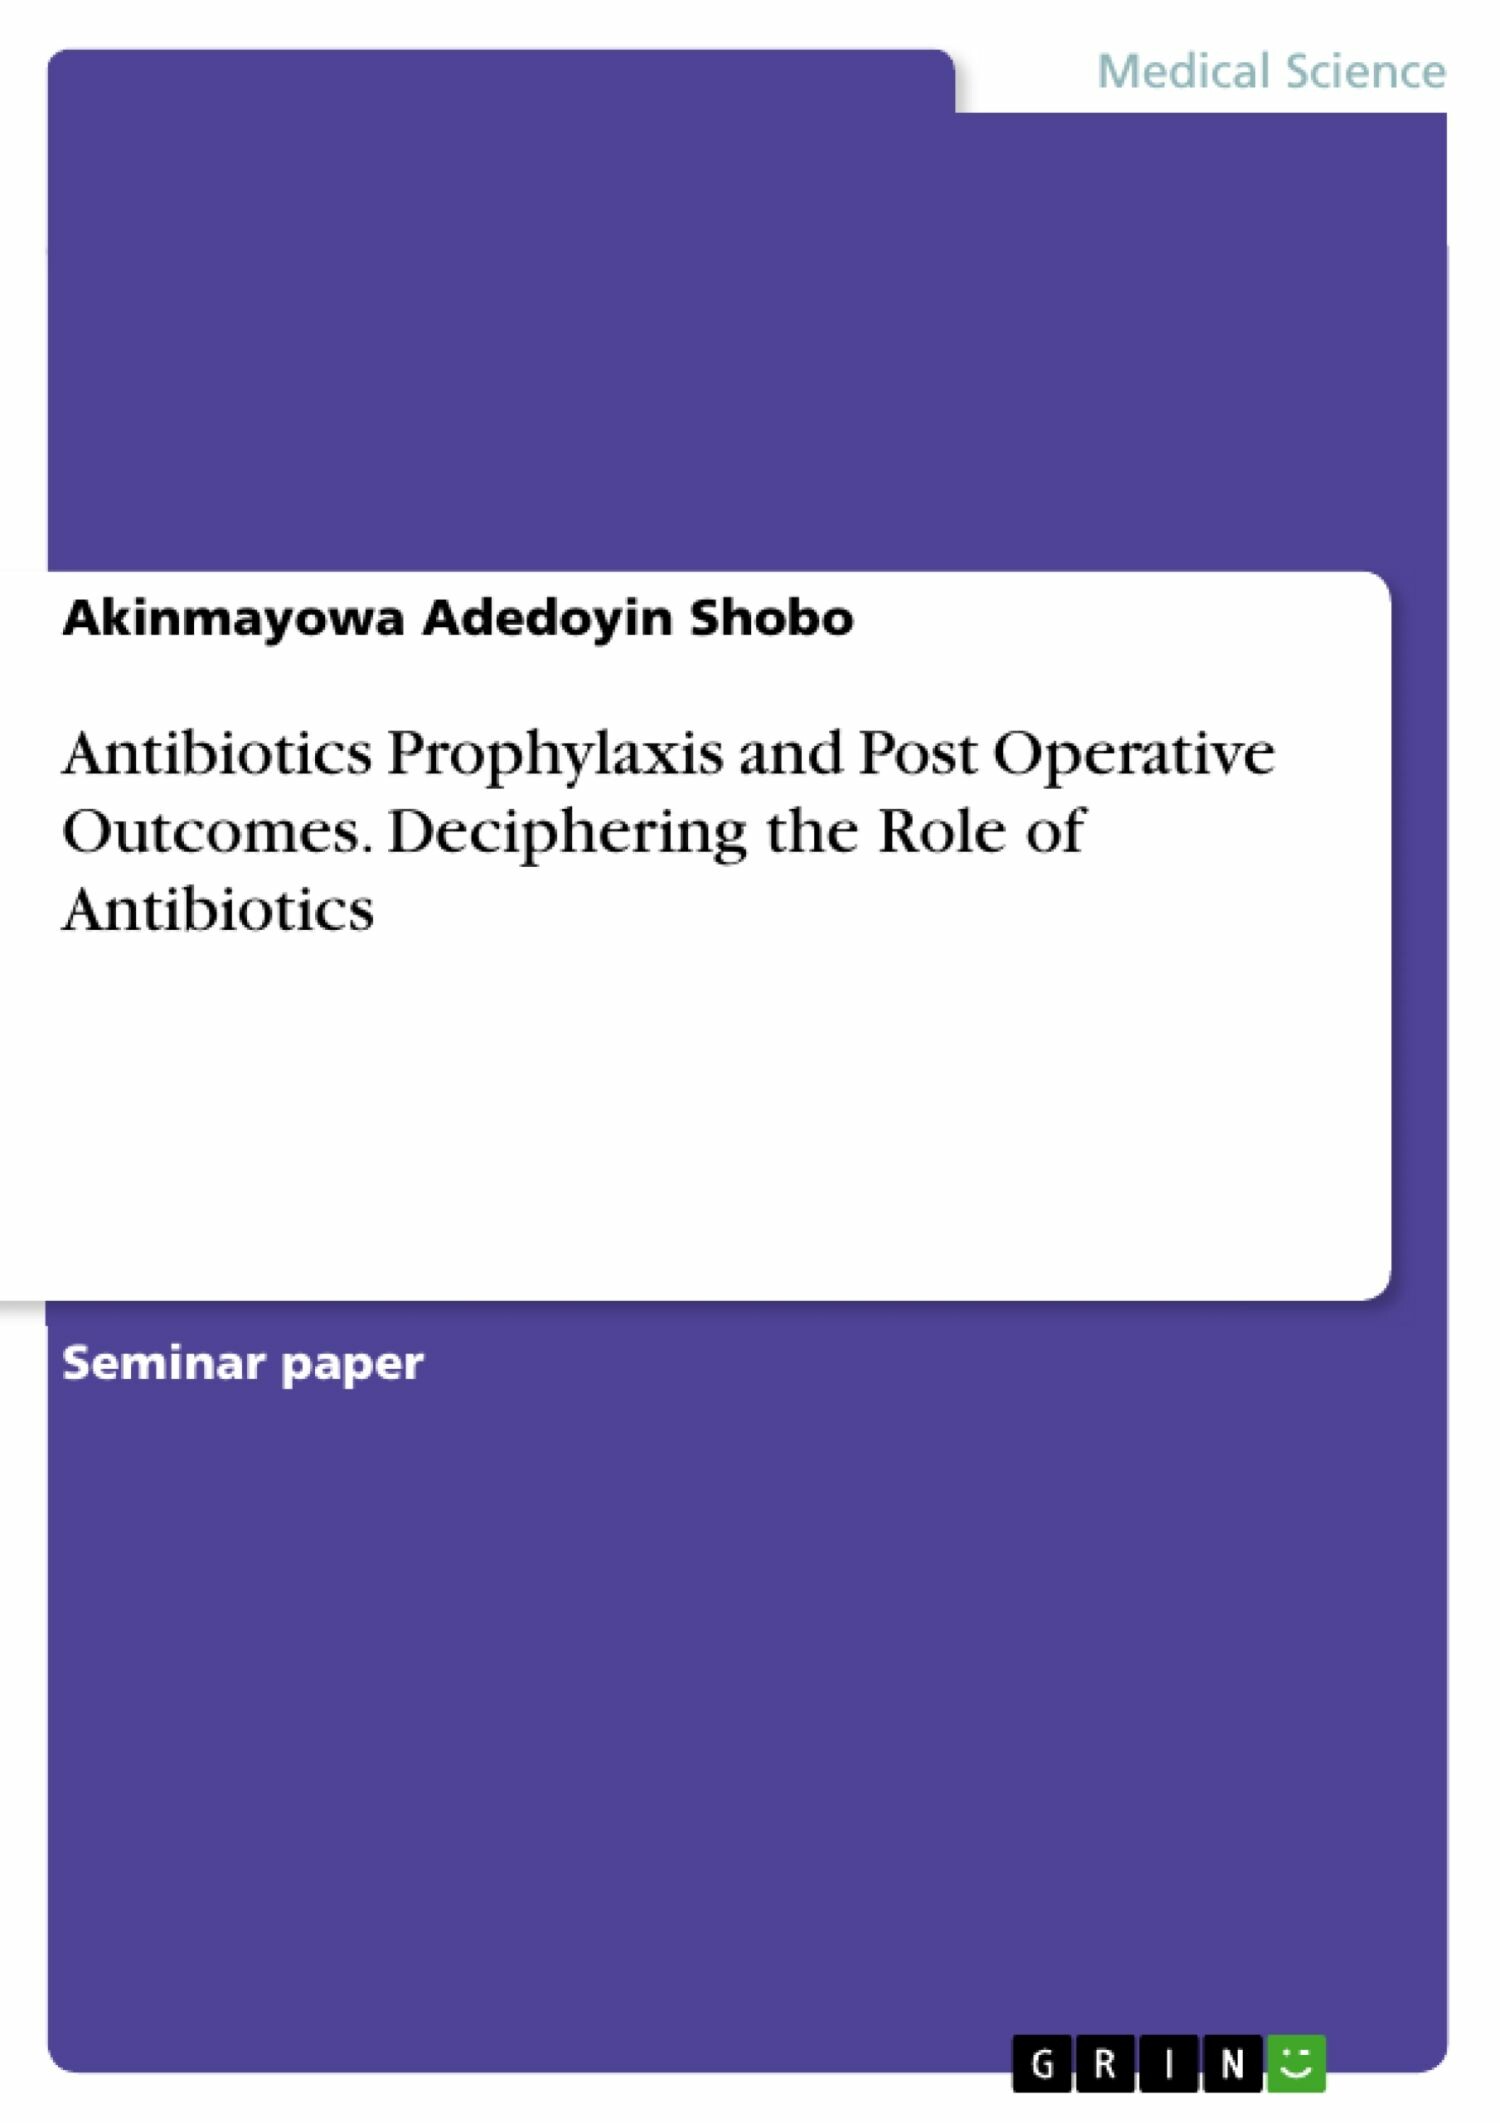 Antibiotics Prophylaxis and Post Operative Outcomes. Deciphering the Role of Antibiotics